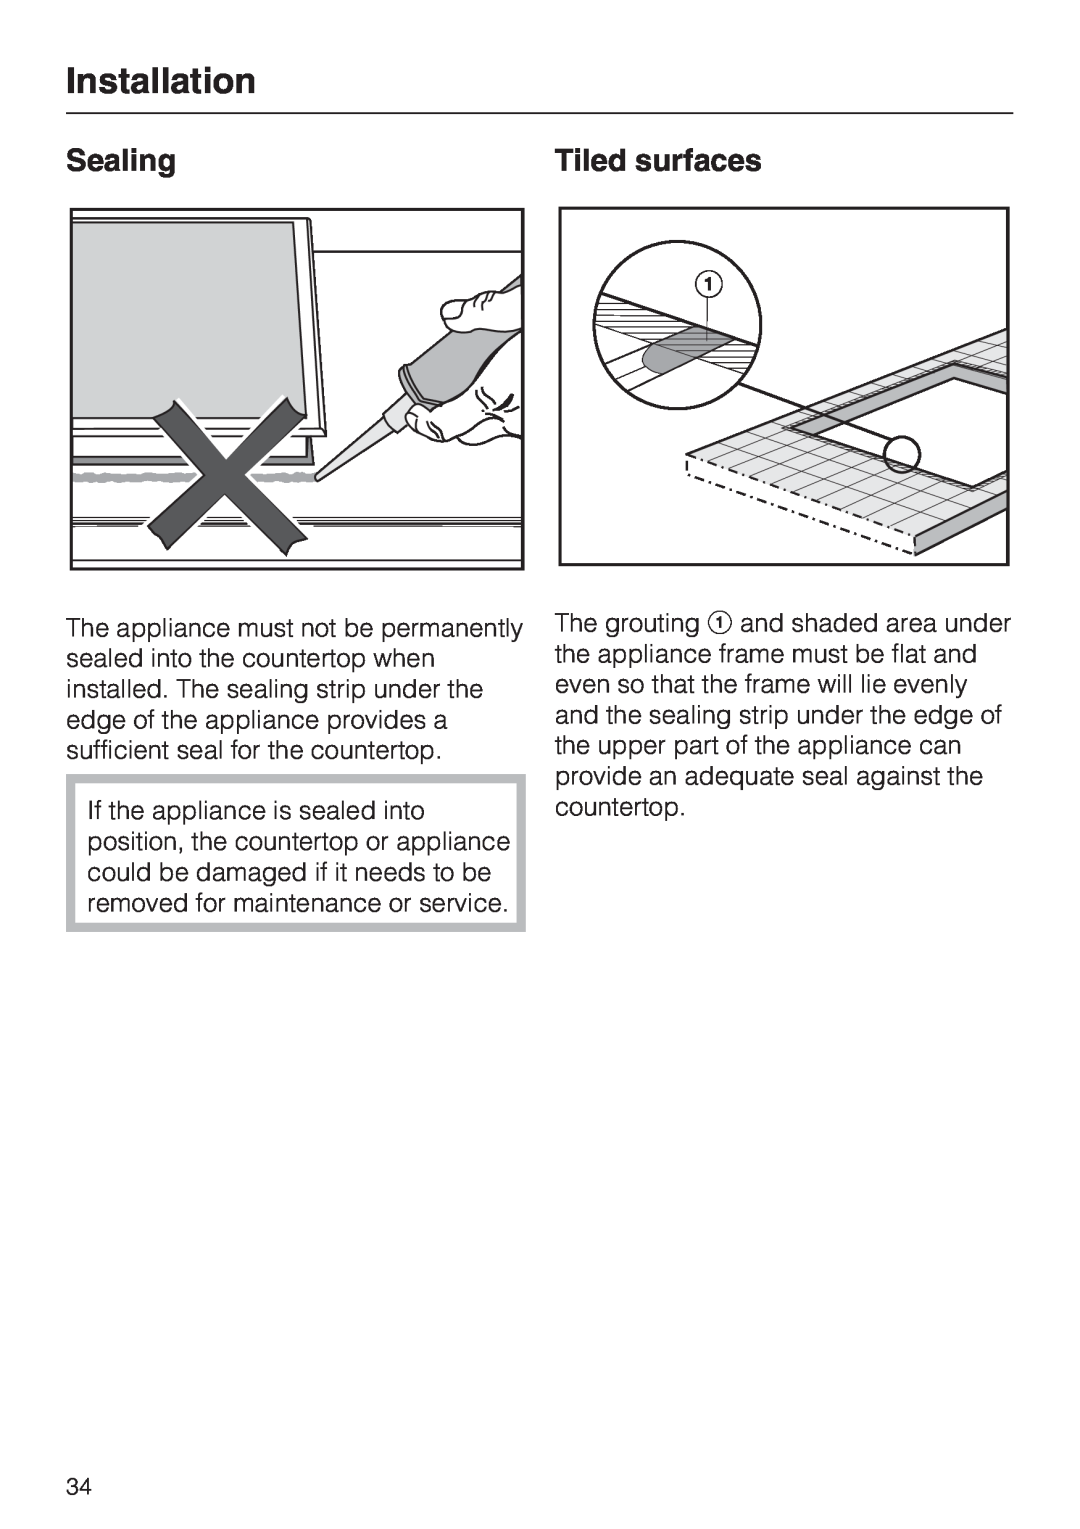 Miele CS 1028 installation instructions Sealing, Tiled surfaces, Installation 